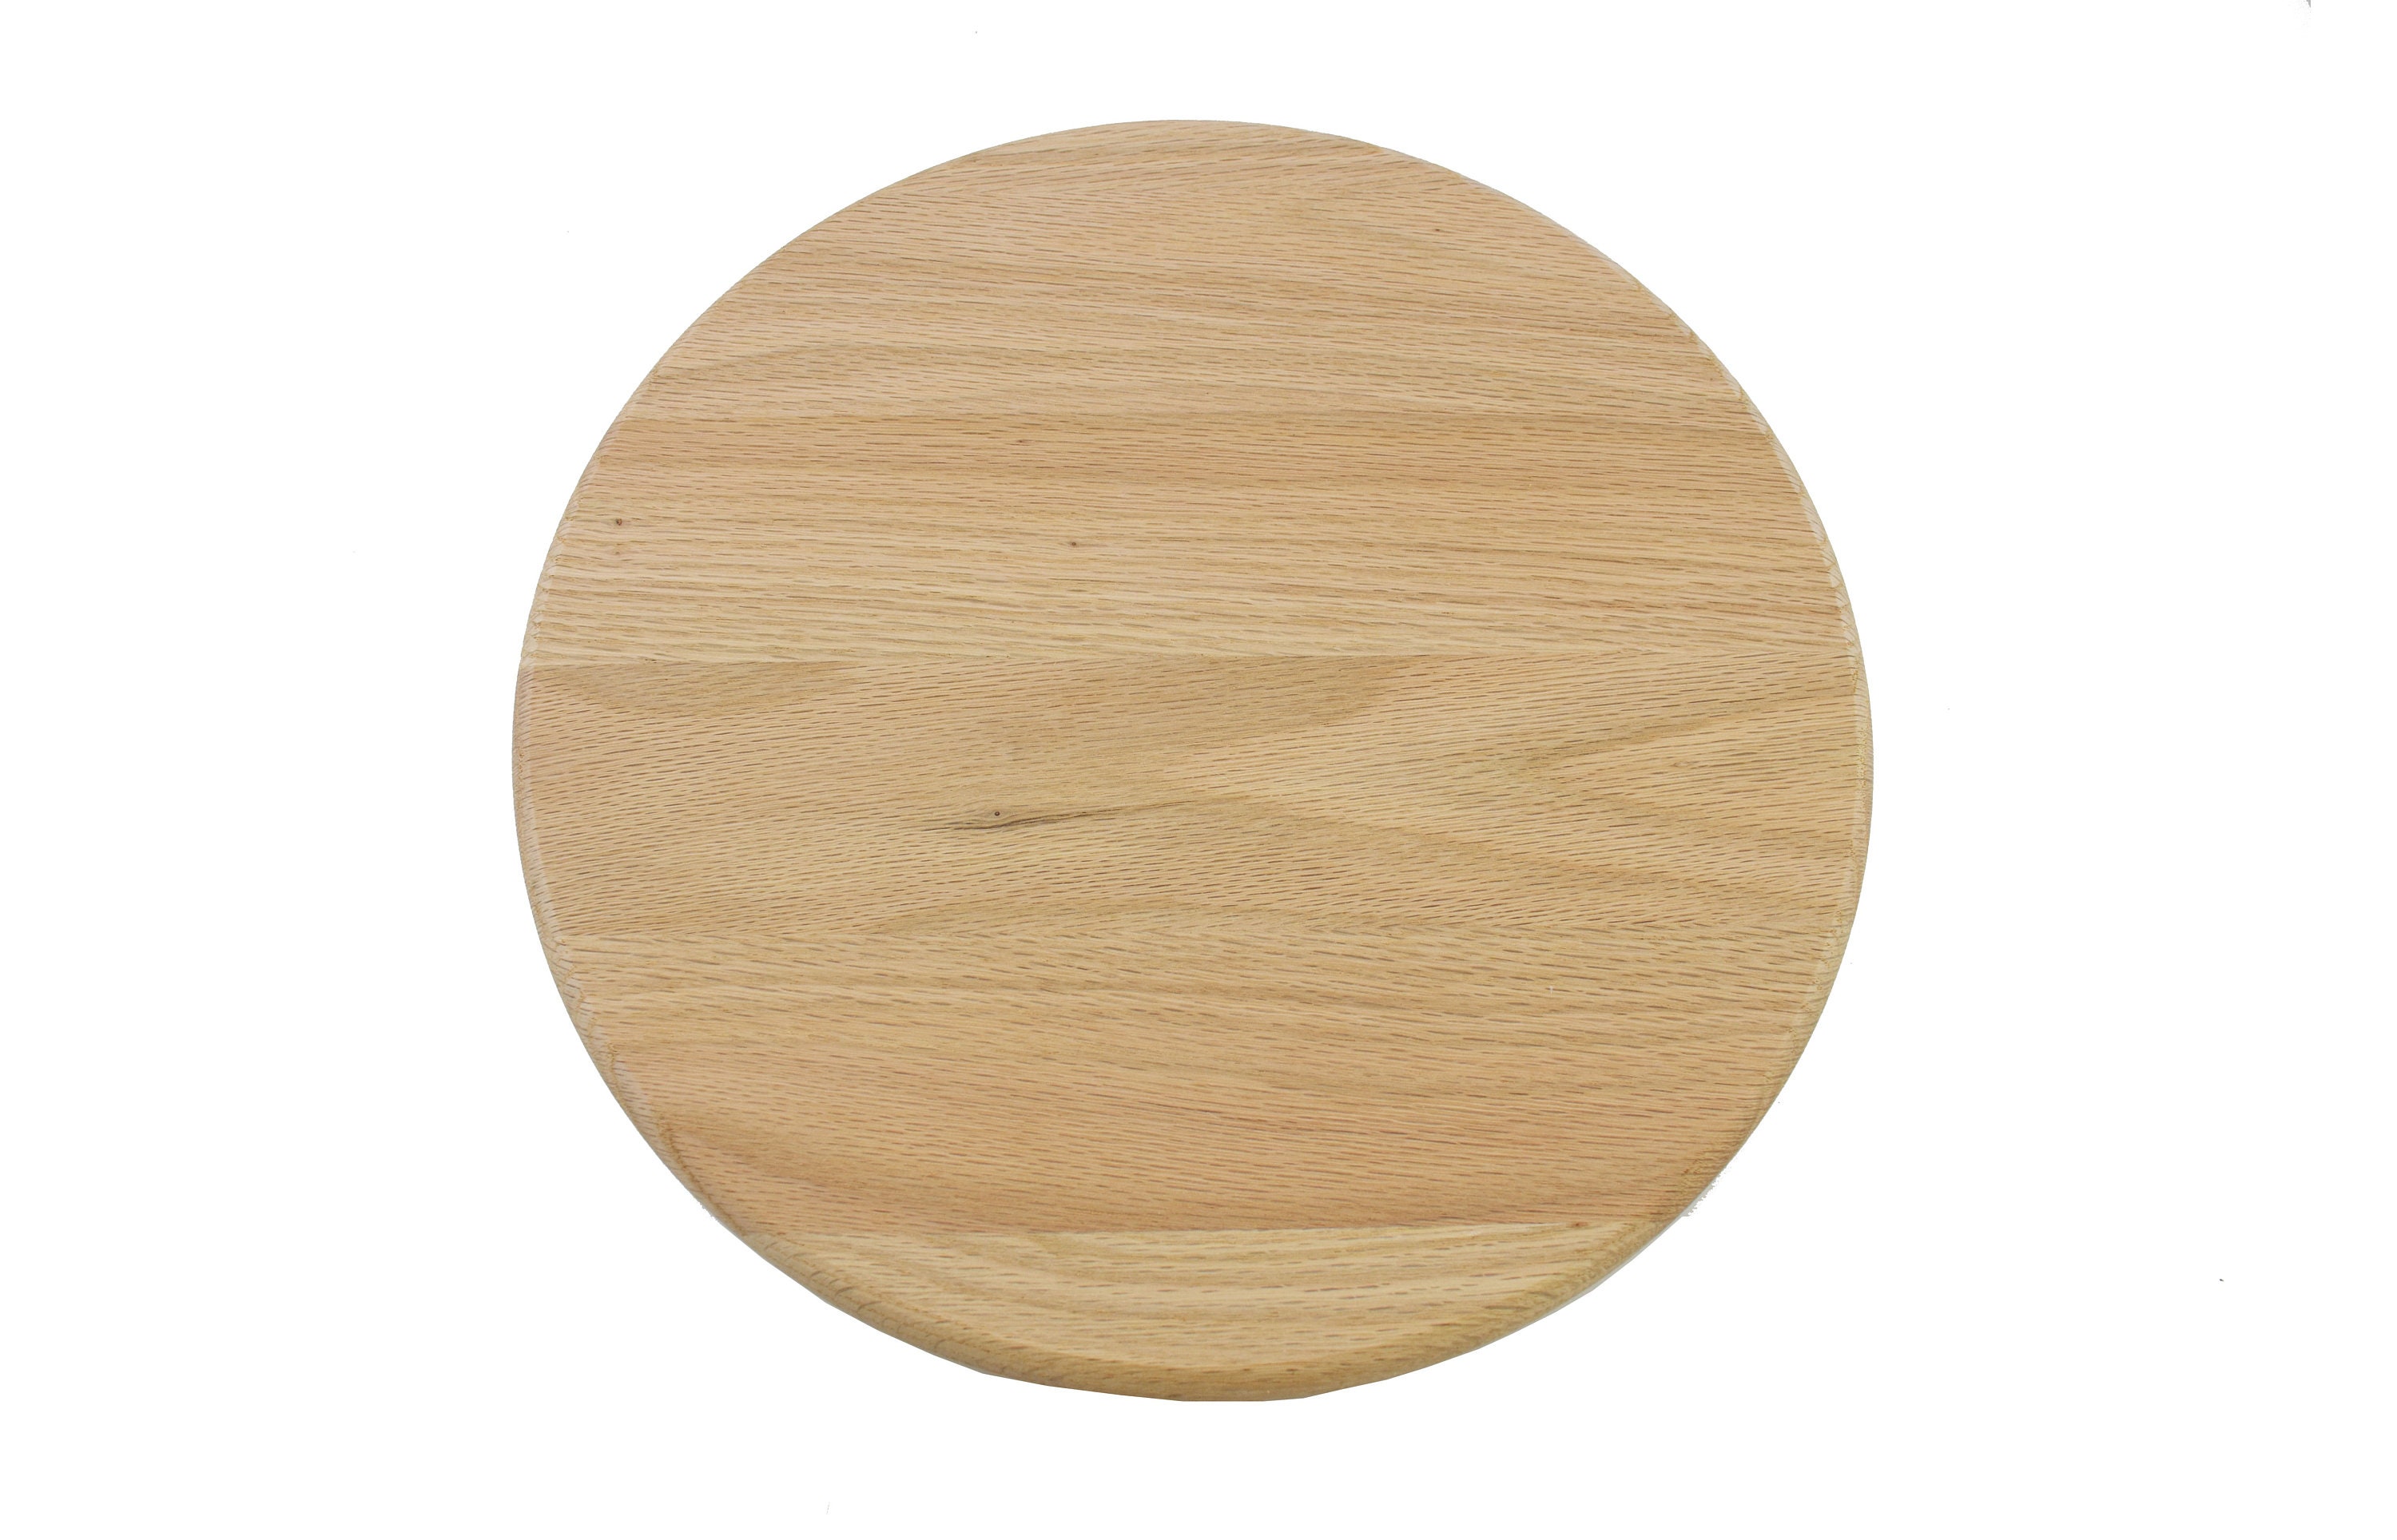 Large Wood Cutting Board for Kitchen 14x11 inch - Bamboo Chopping